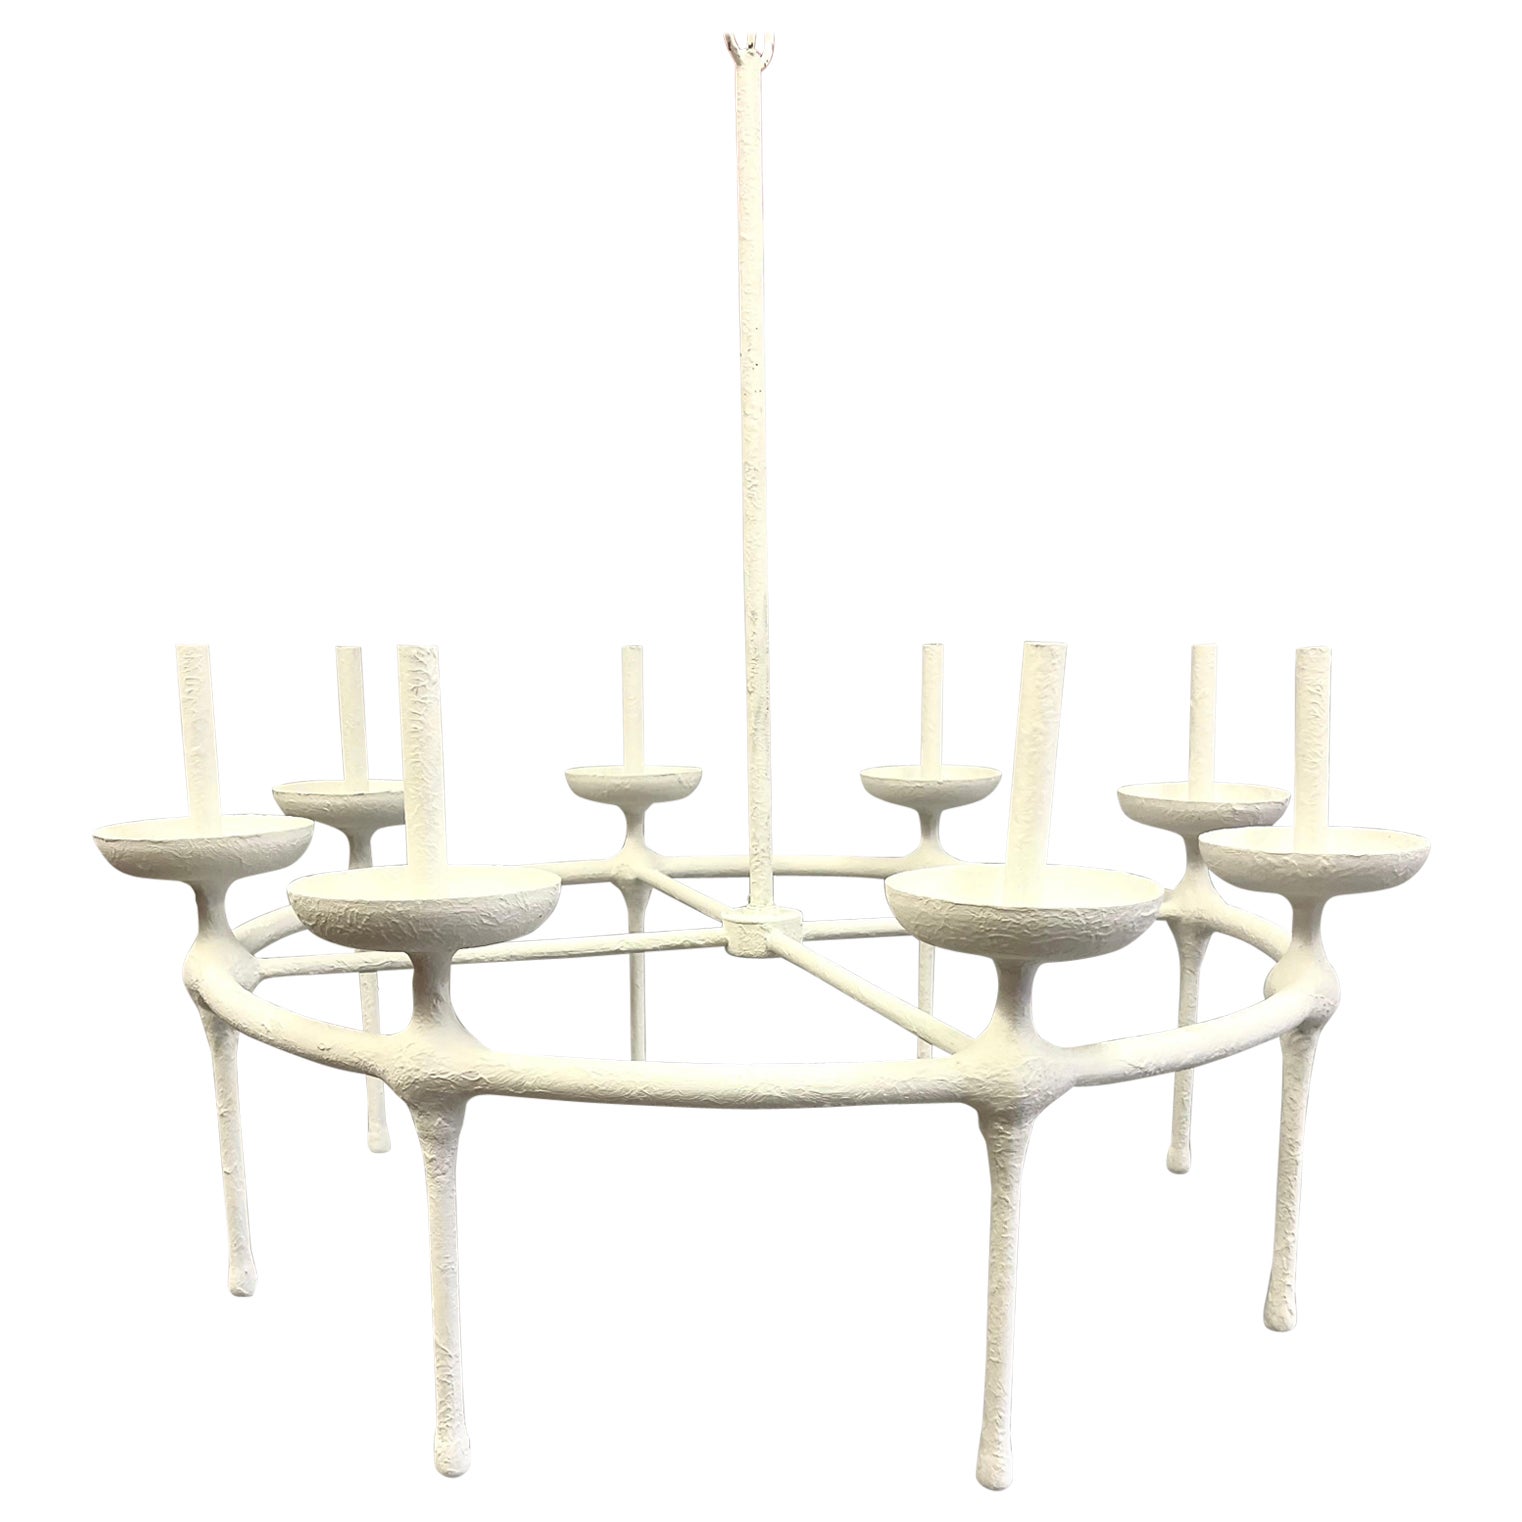 French, Modern Neoclassical Plaster Chandelier in the Style of Diego Giacometti For Sale